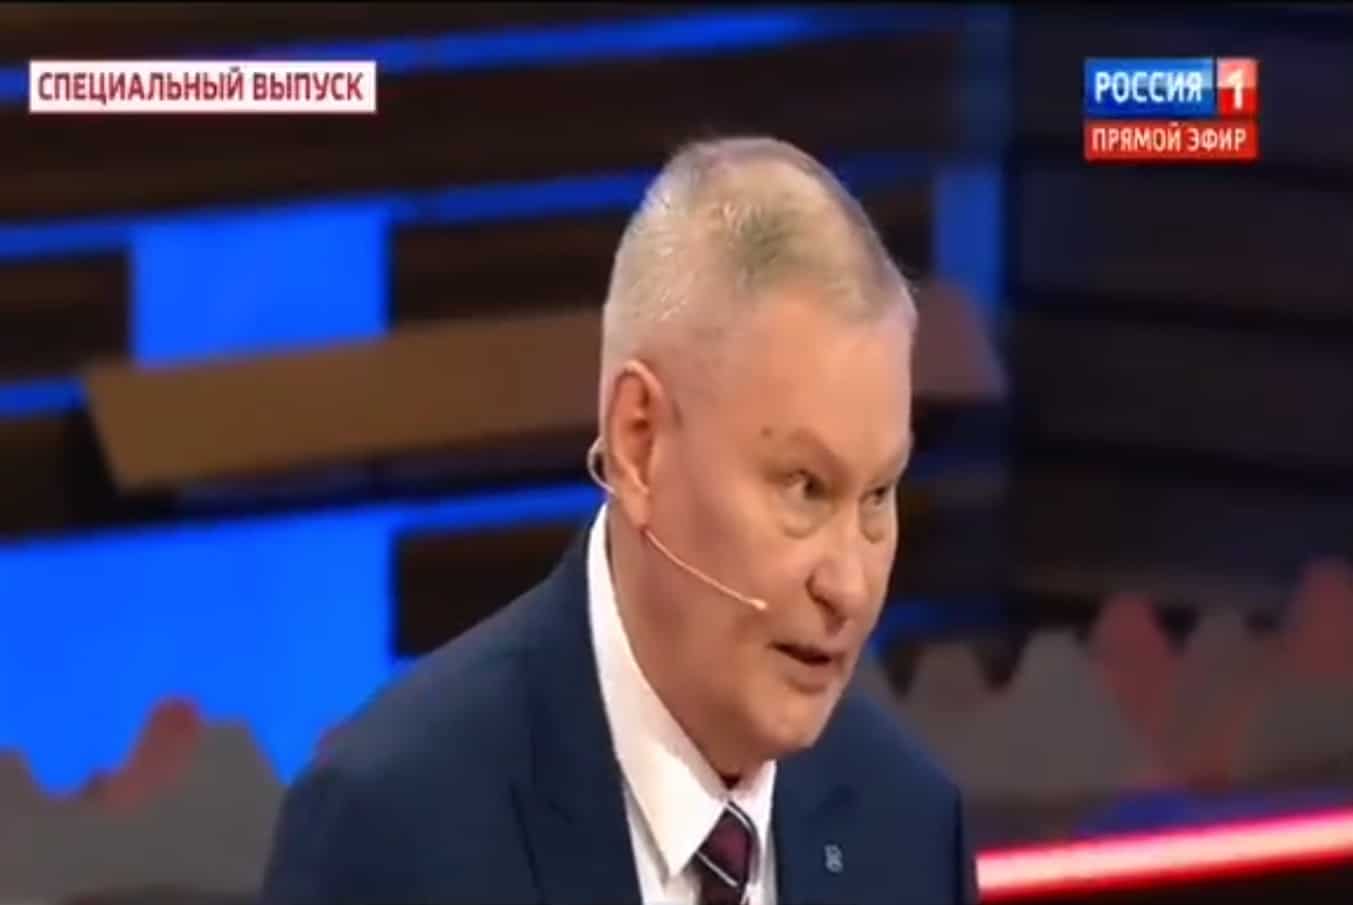 Russian pundit gives honest assessment of war in Ukraine in ‘extremely rare moment of candour’